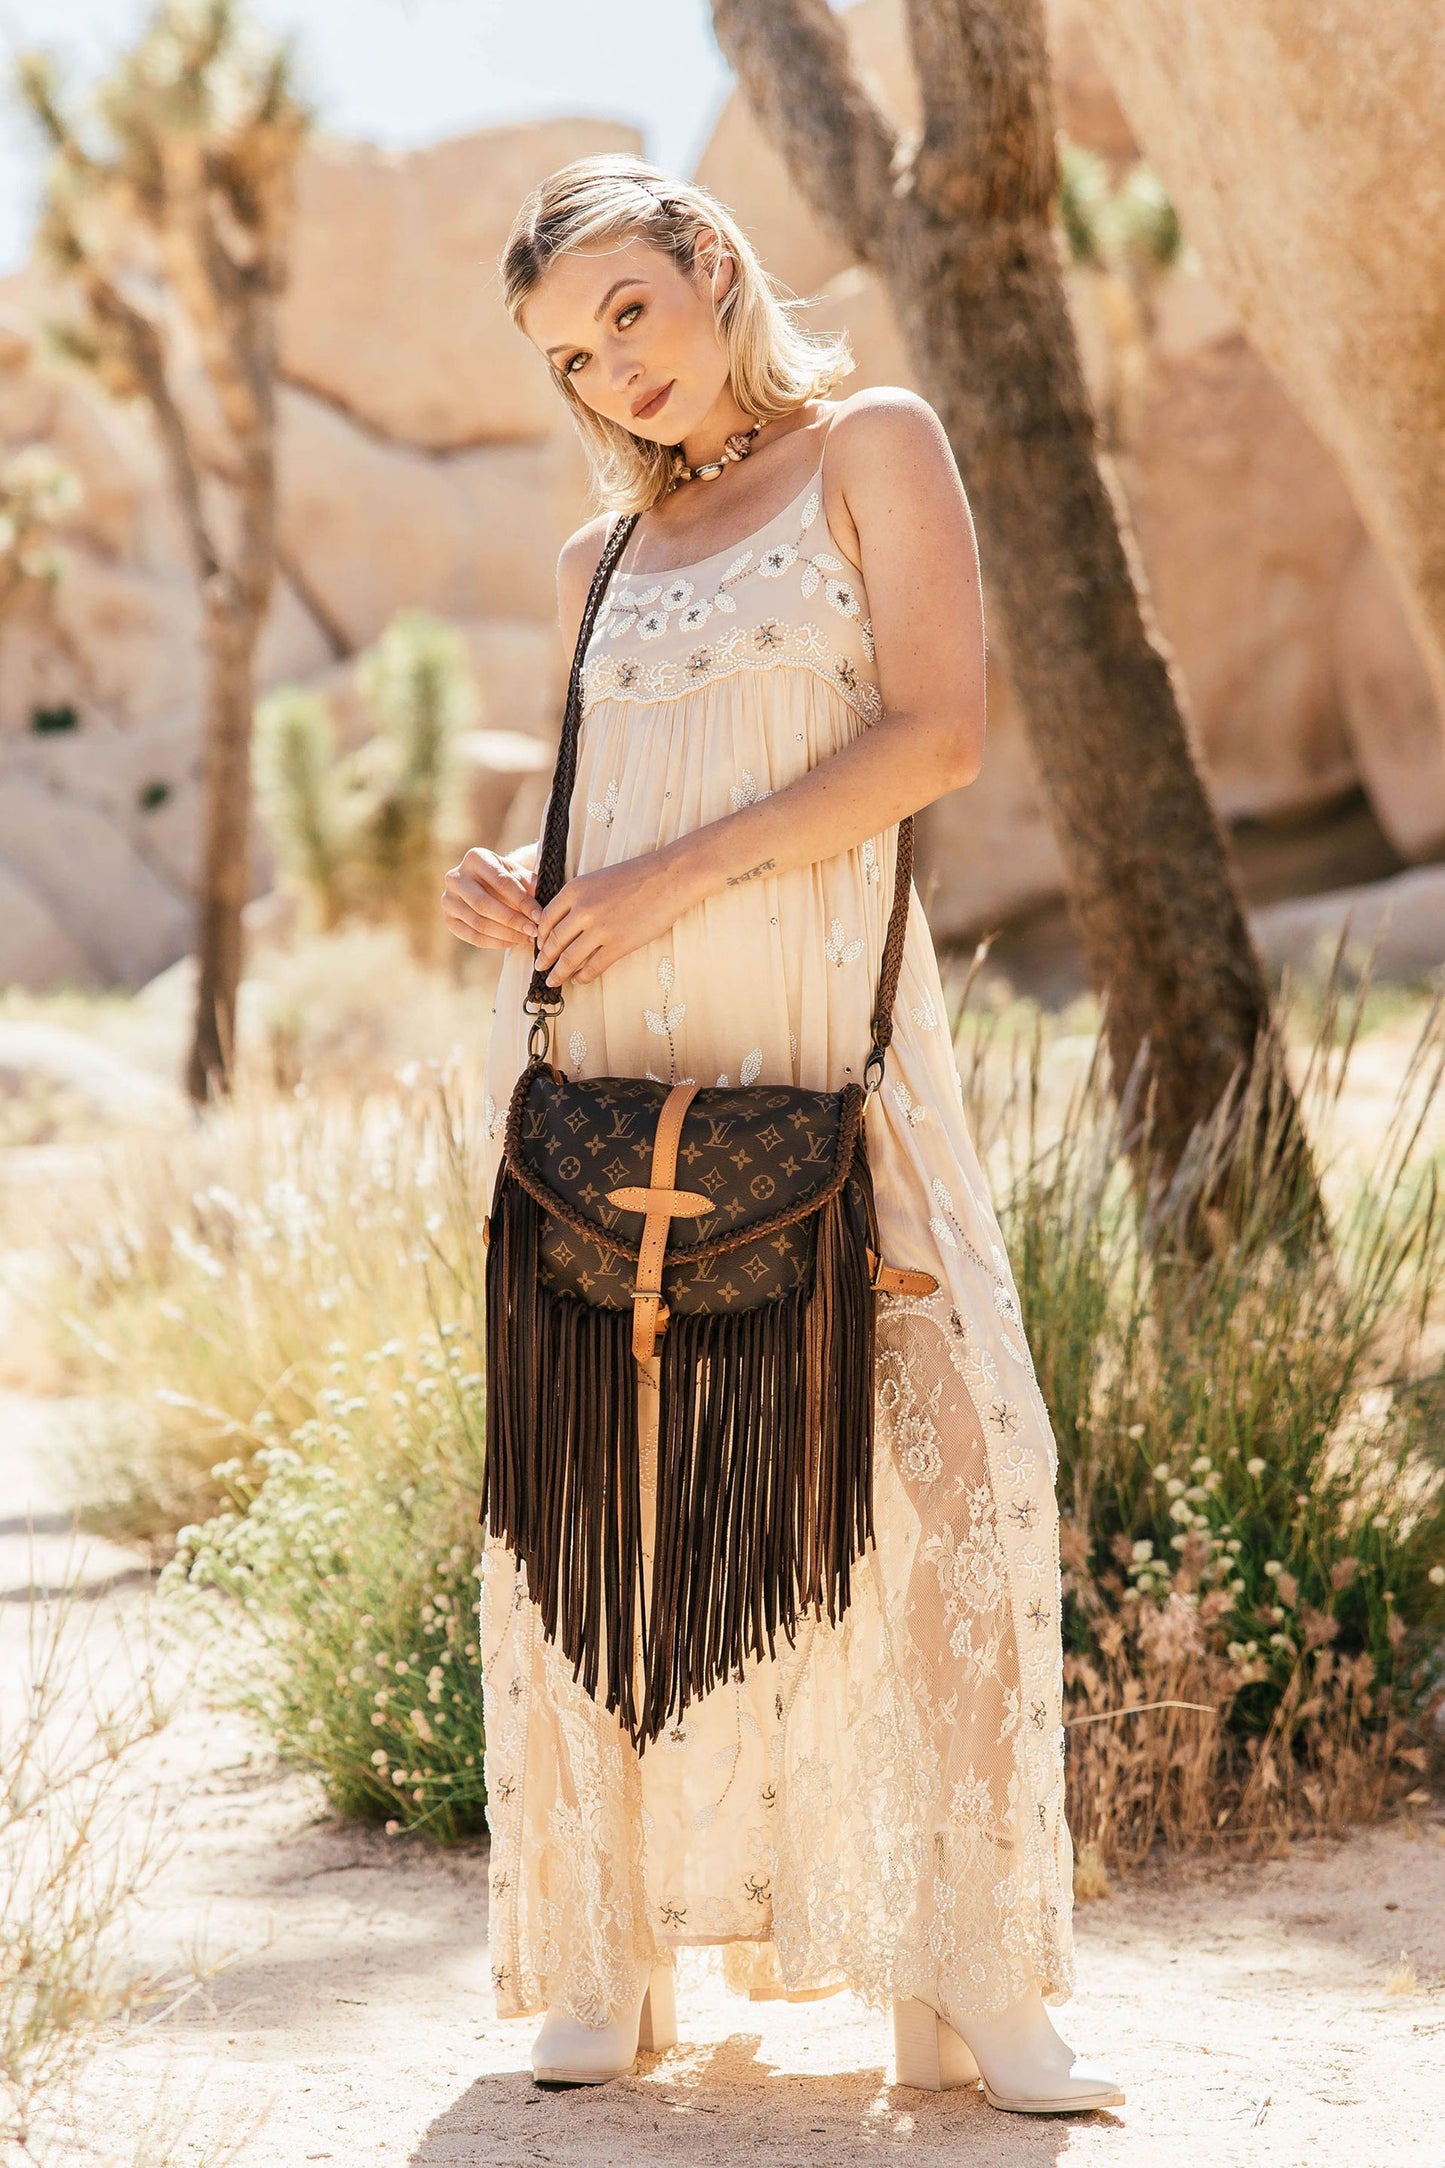 Collections – Vintage Boho Bags